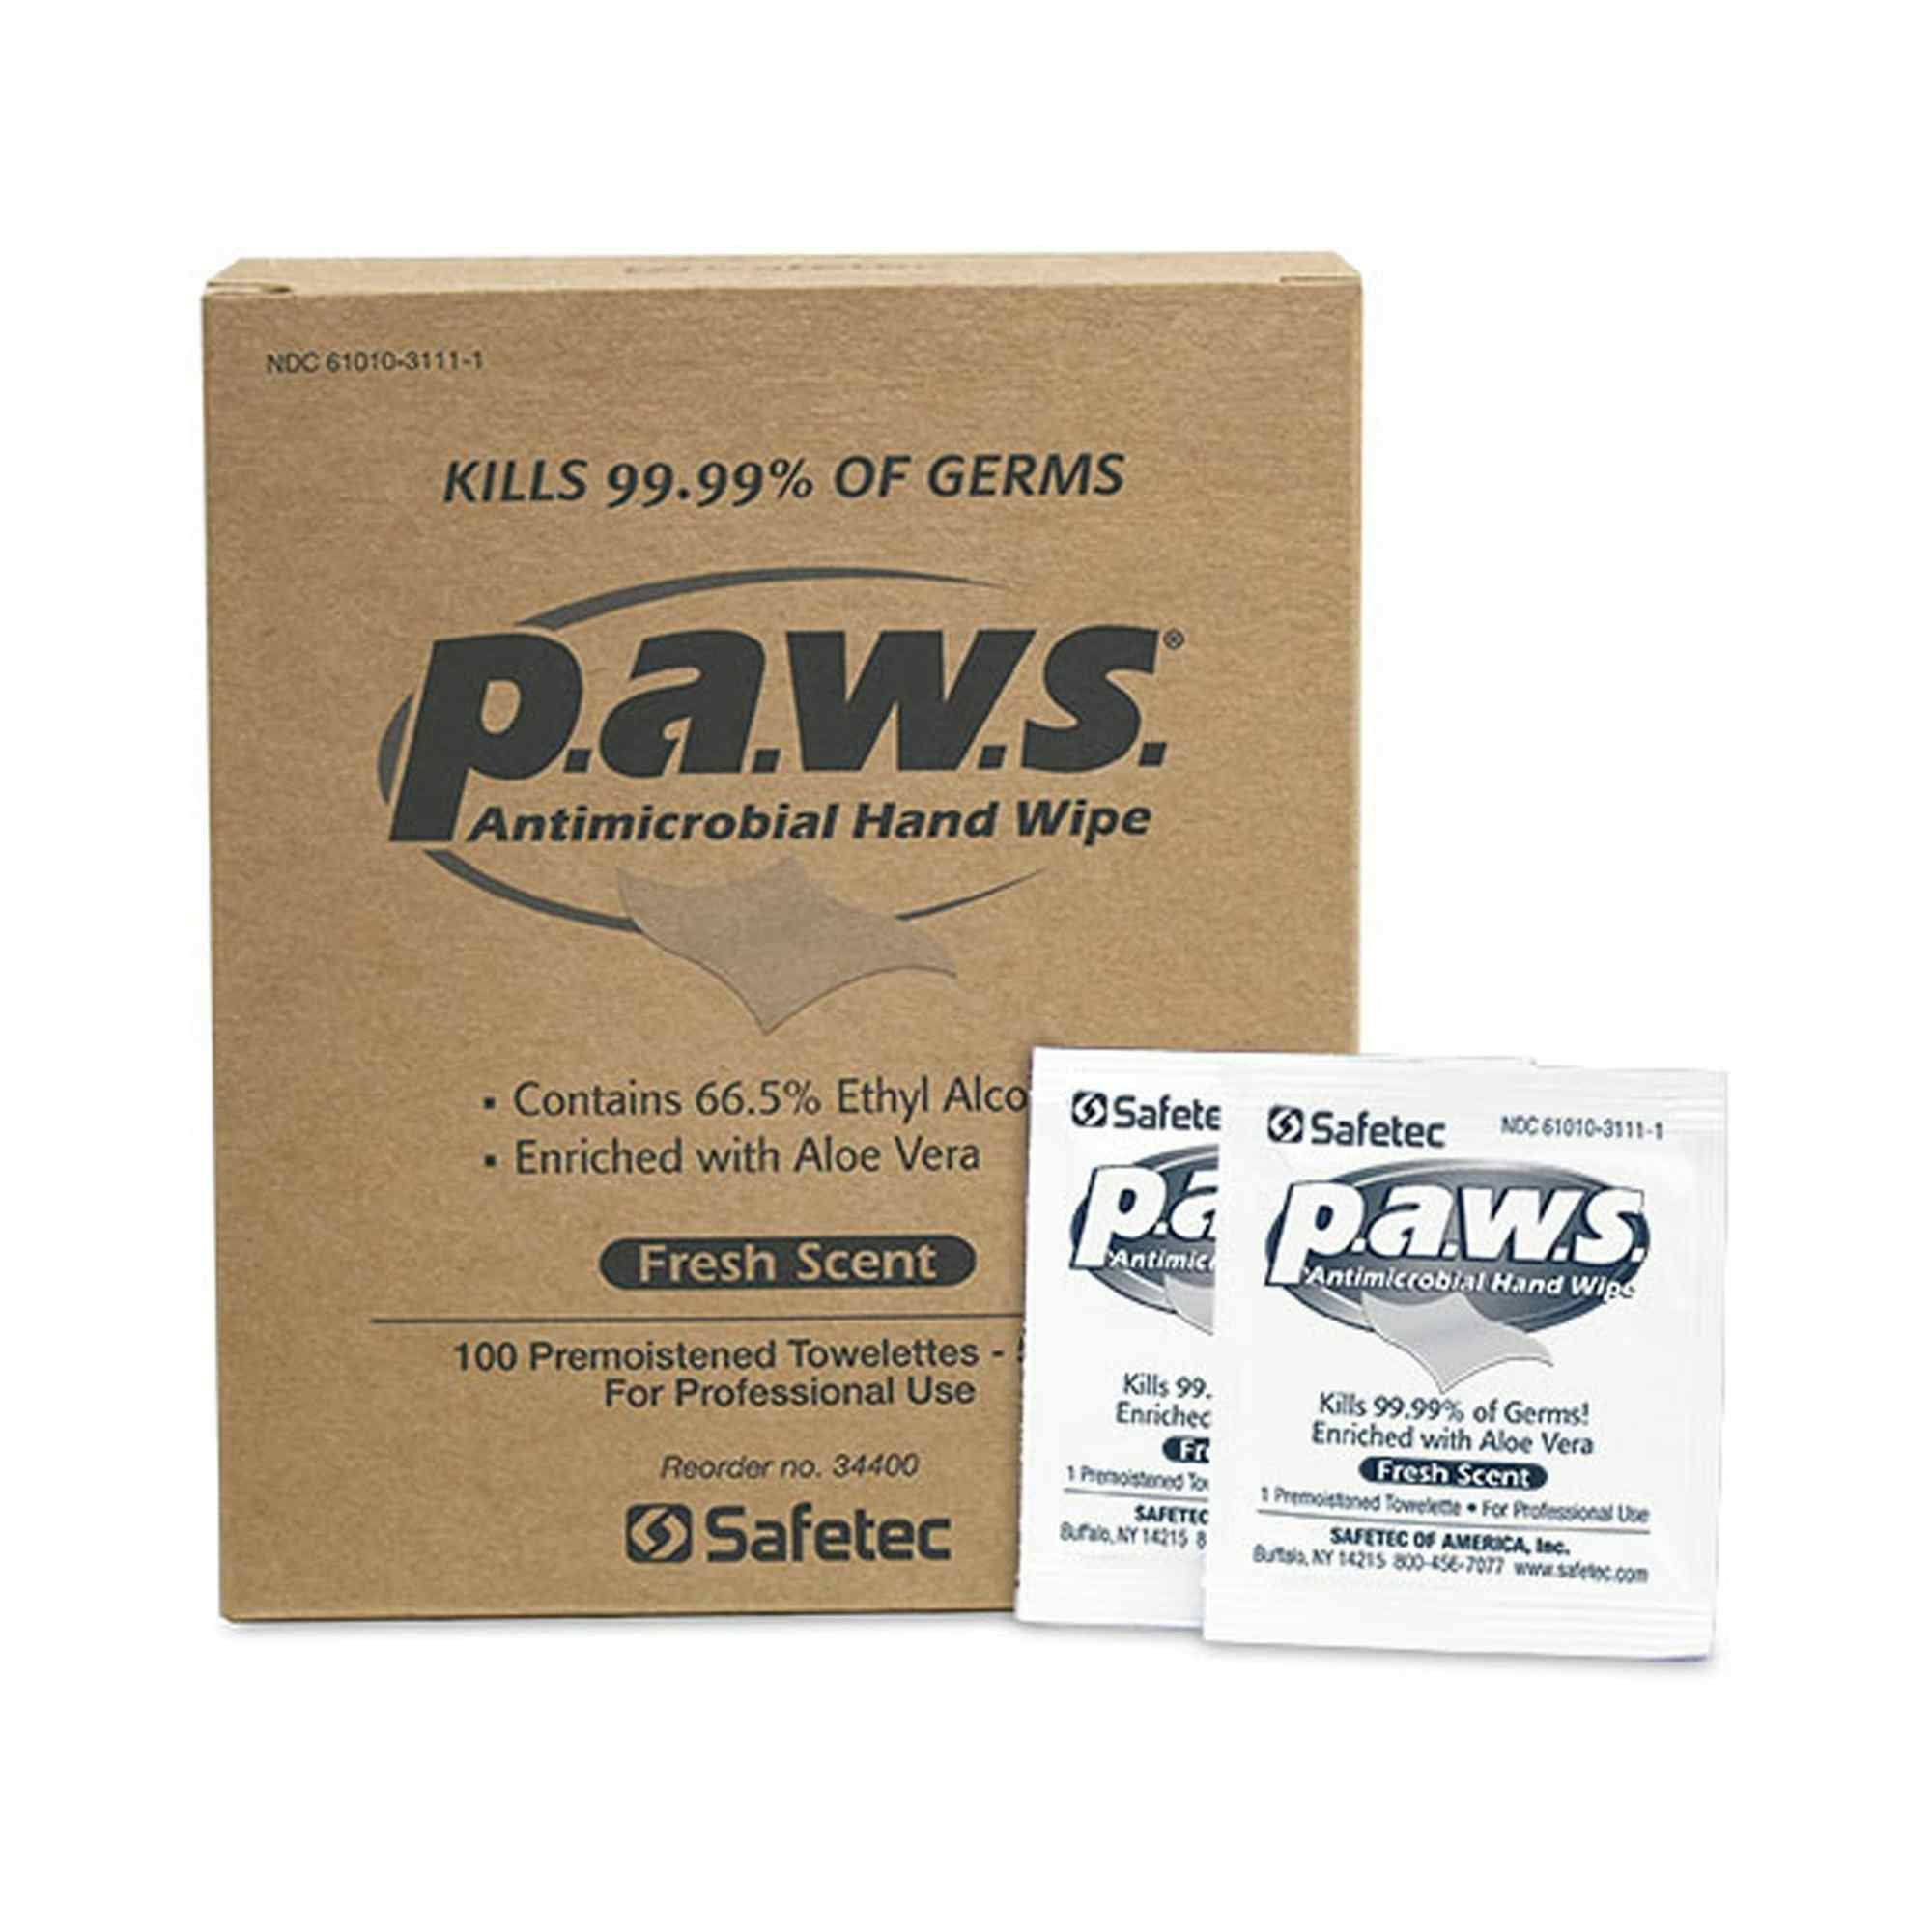 P.A.W.S. Antimicrobial Hand Wipe, Fresh Scent, 34400, Case of 1000 (10 Boxes)